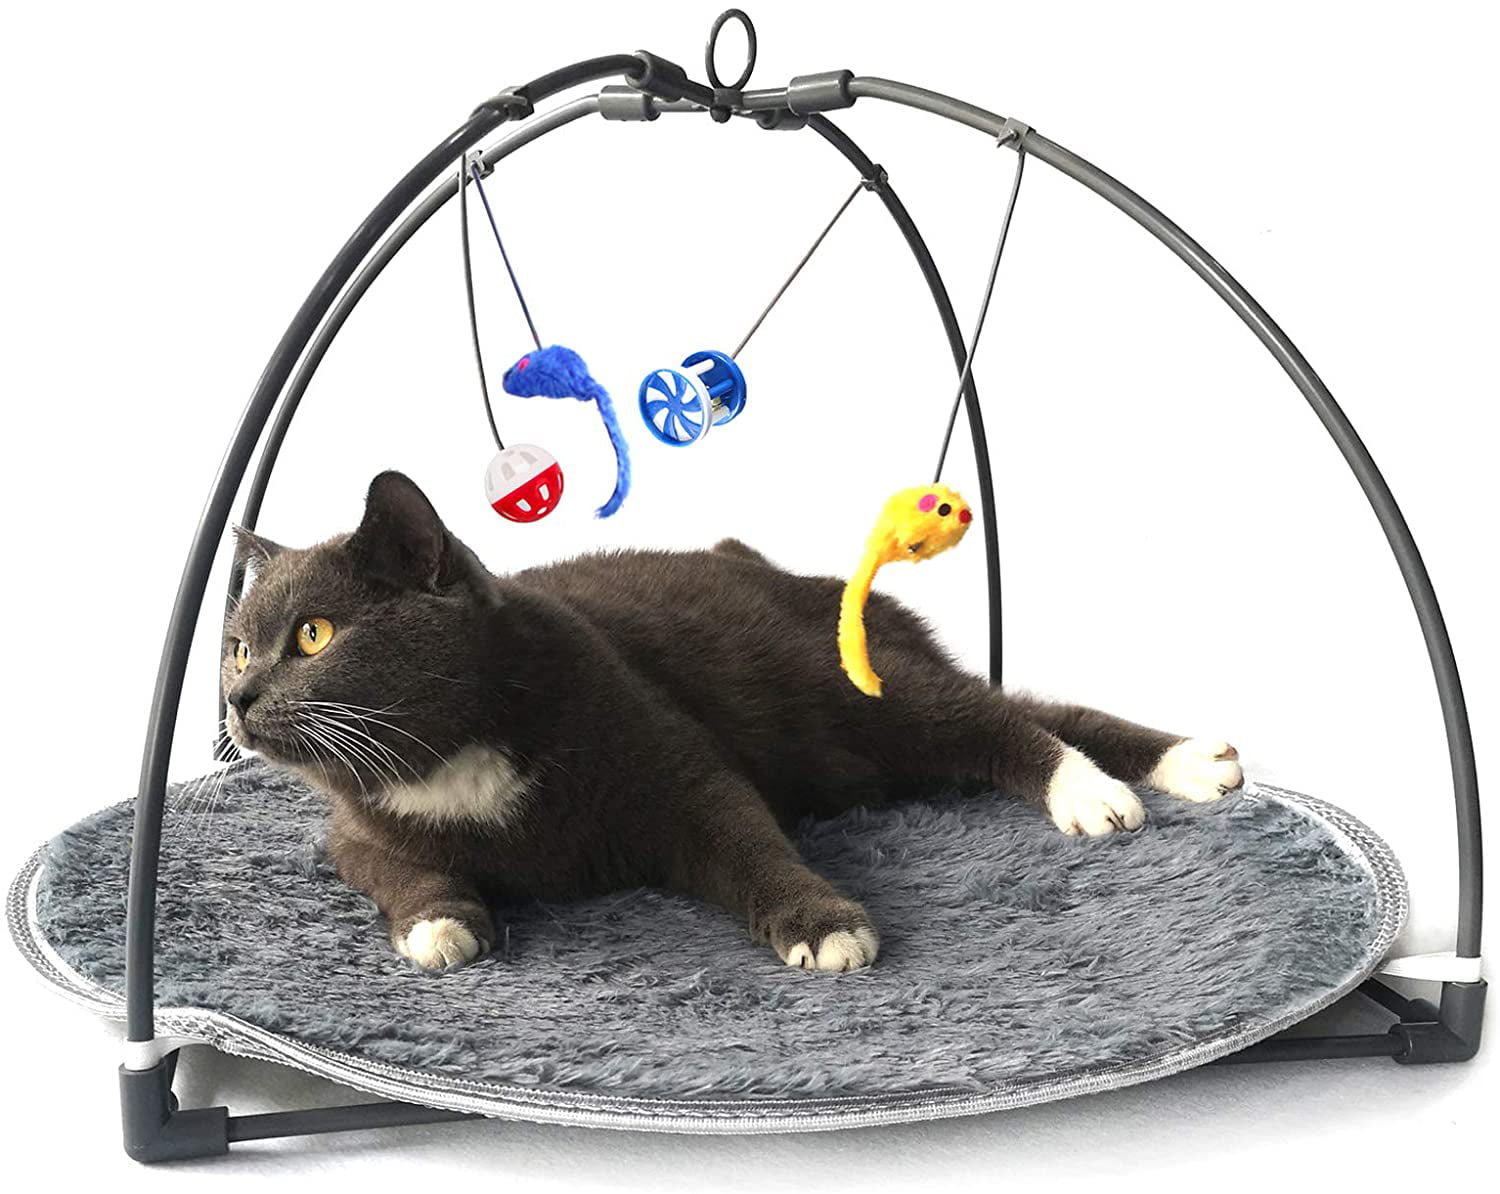 Lâ Vestmon Kitten Bed Multi-Function Pet Kitten Cat Interactive Activity Soft Fleece Folding Toy Mat Bed With Hanging Toys Bells Balls And Mice.